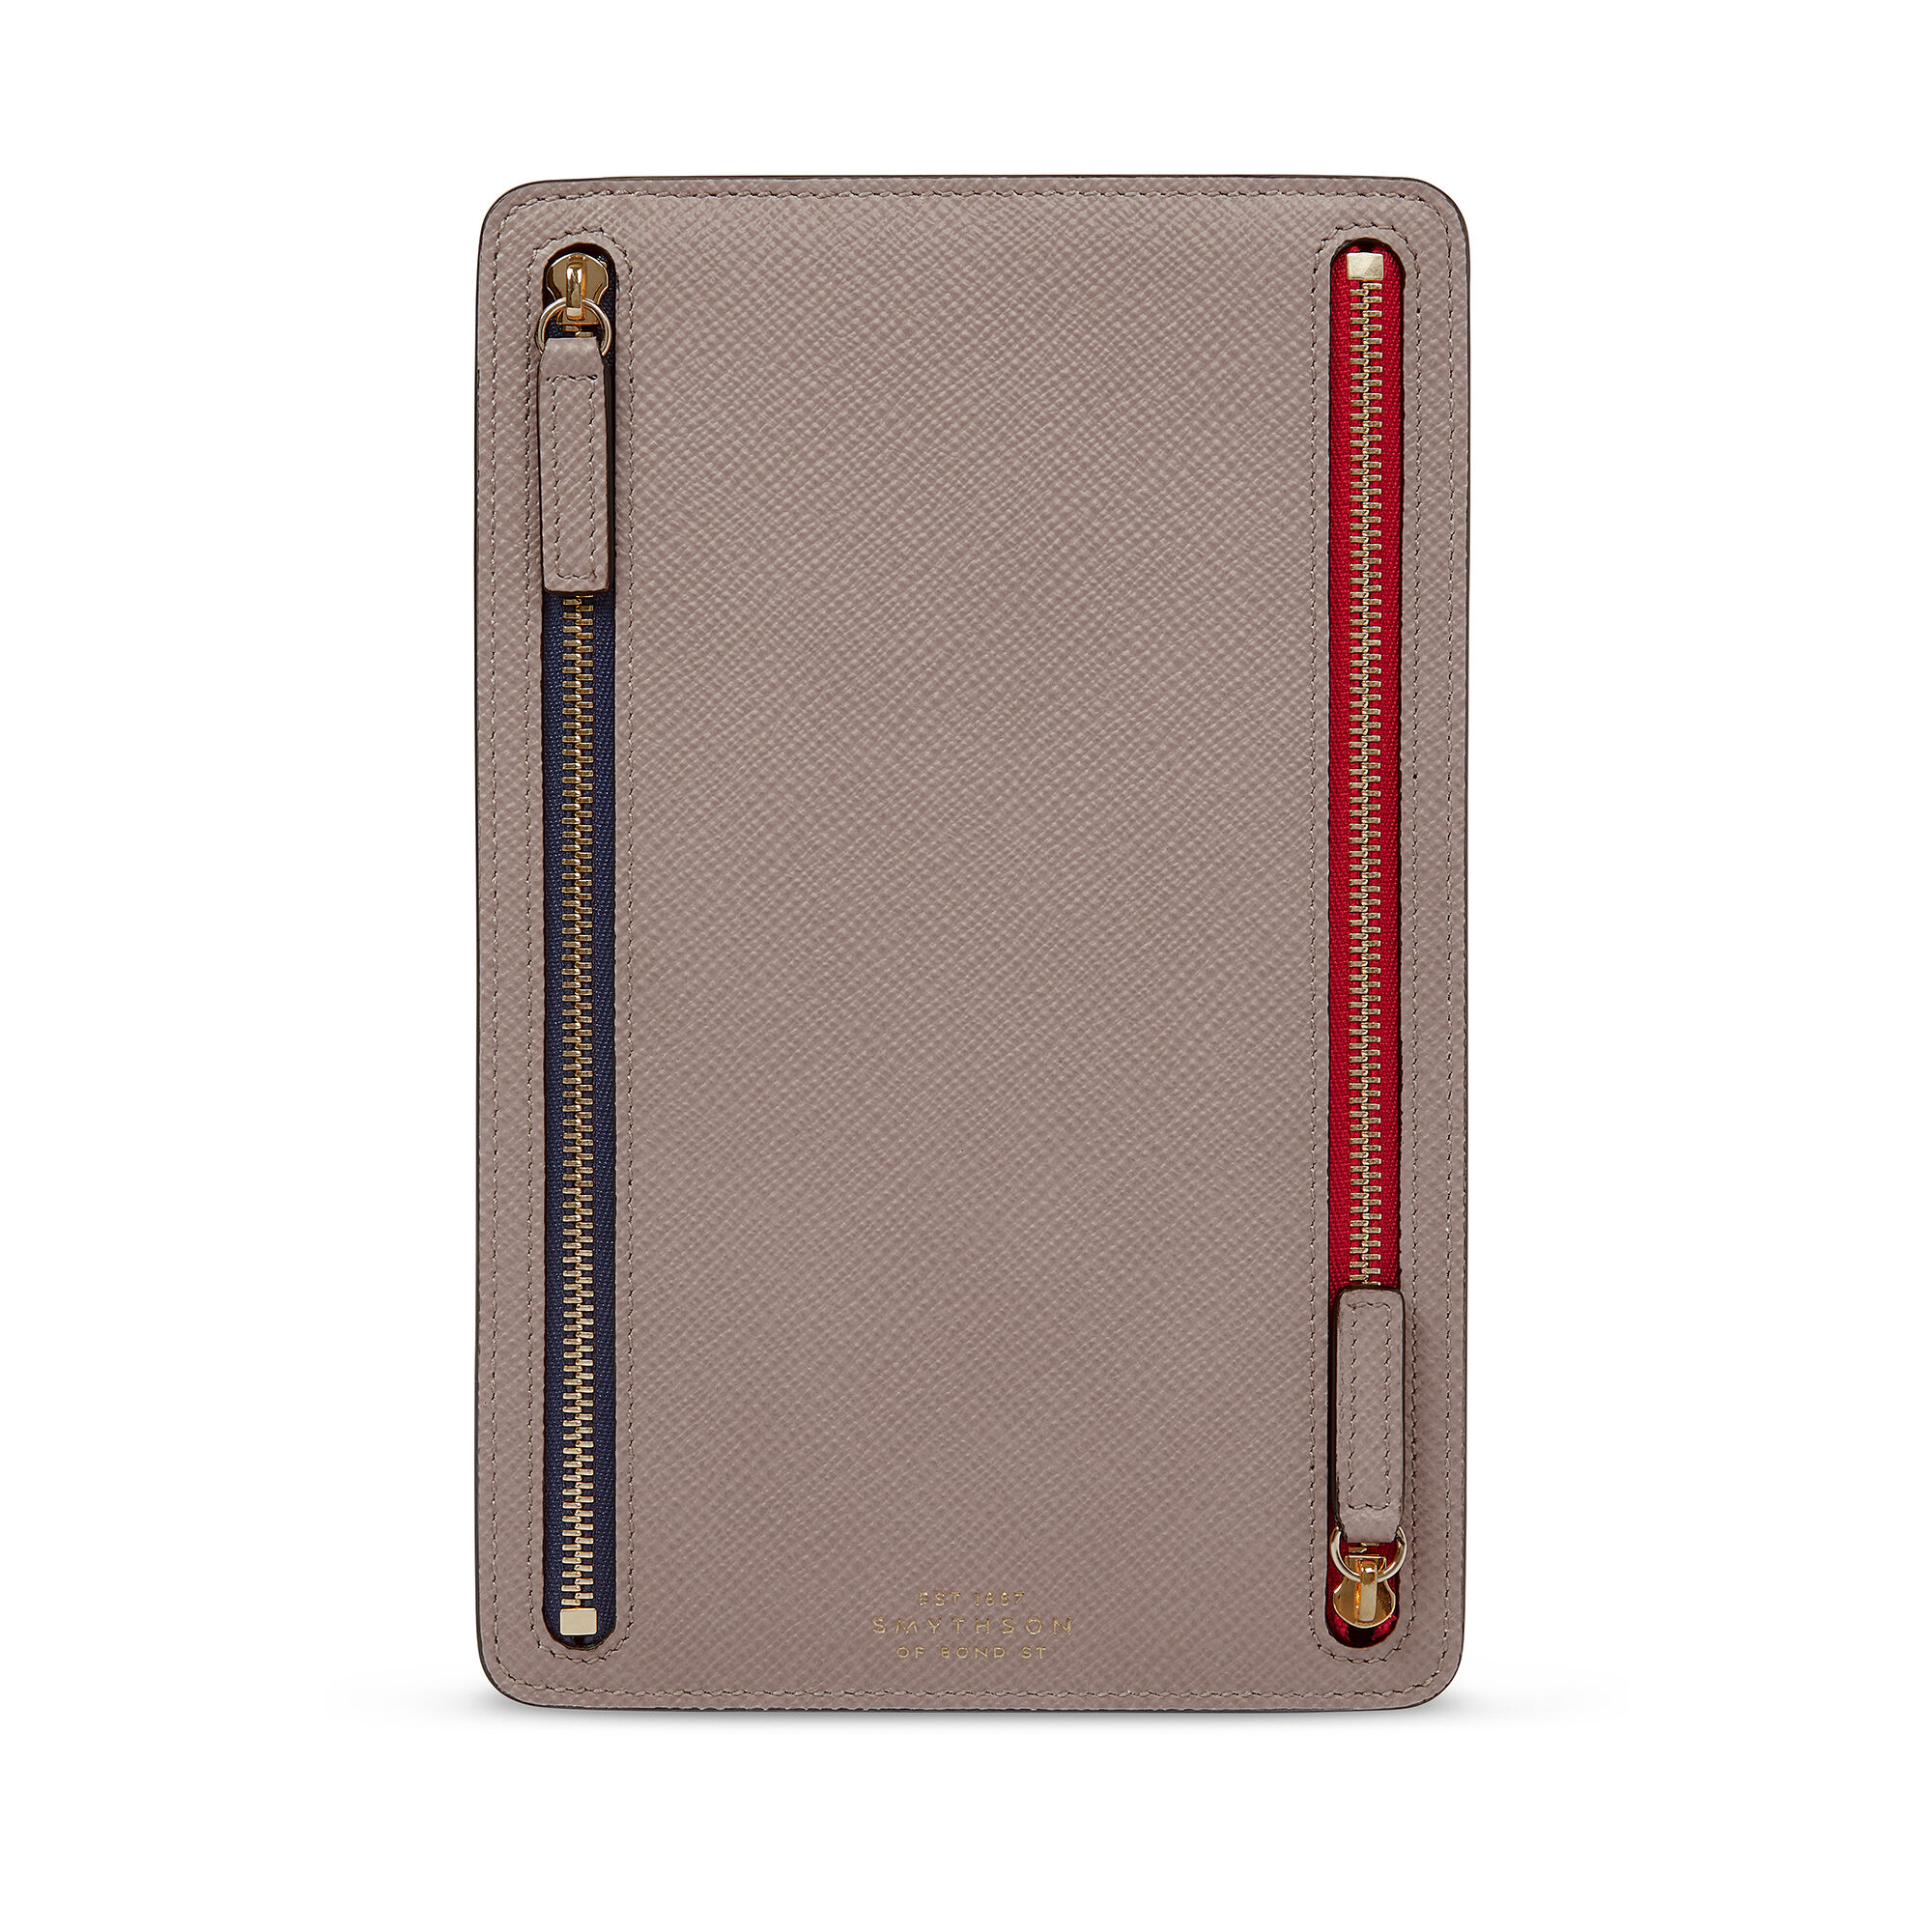 SMYTHSON Zip Currency Case（カレンシーケース）